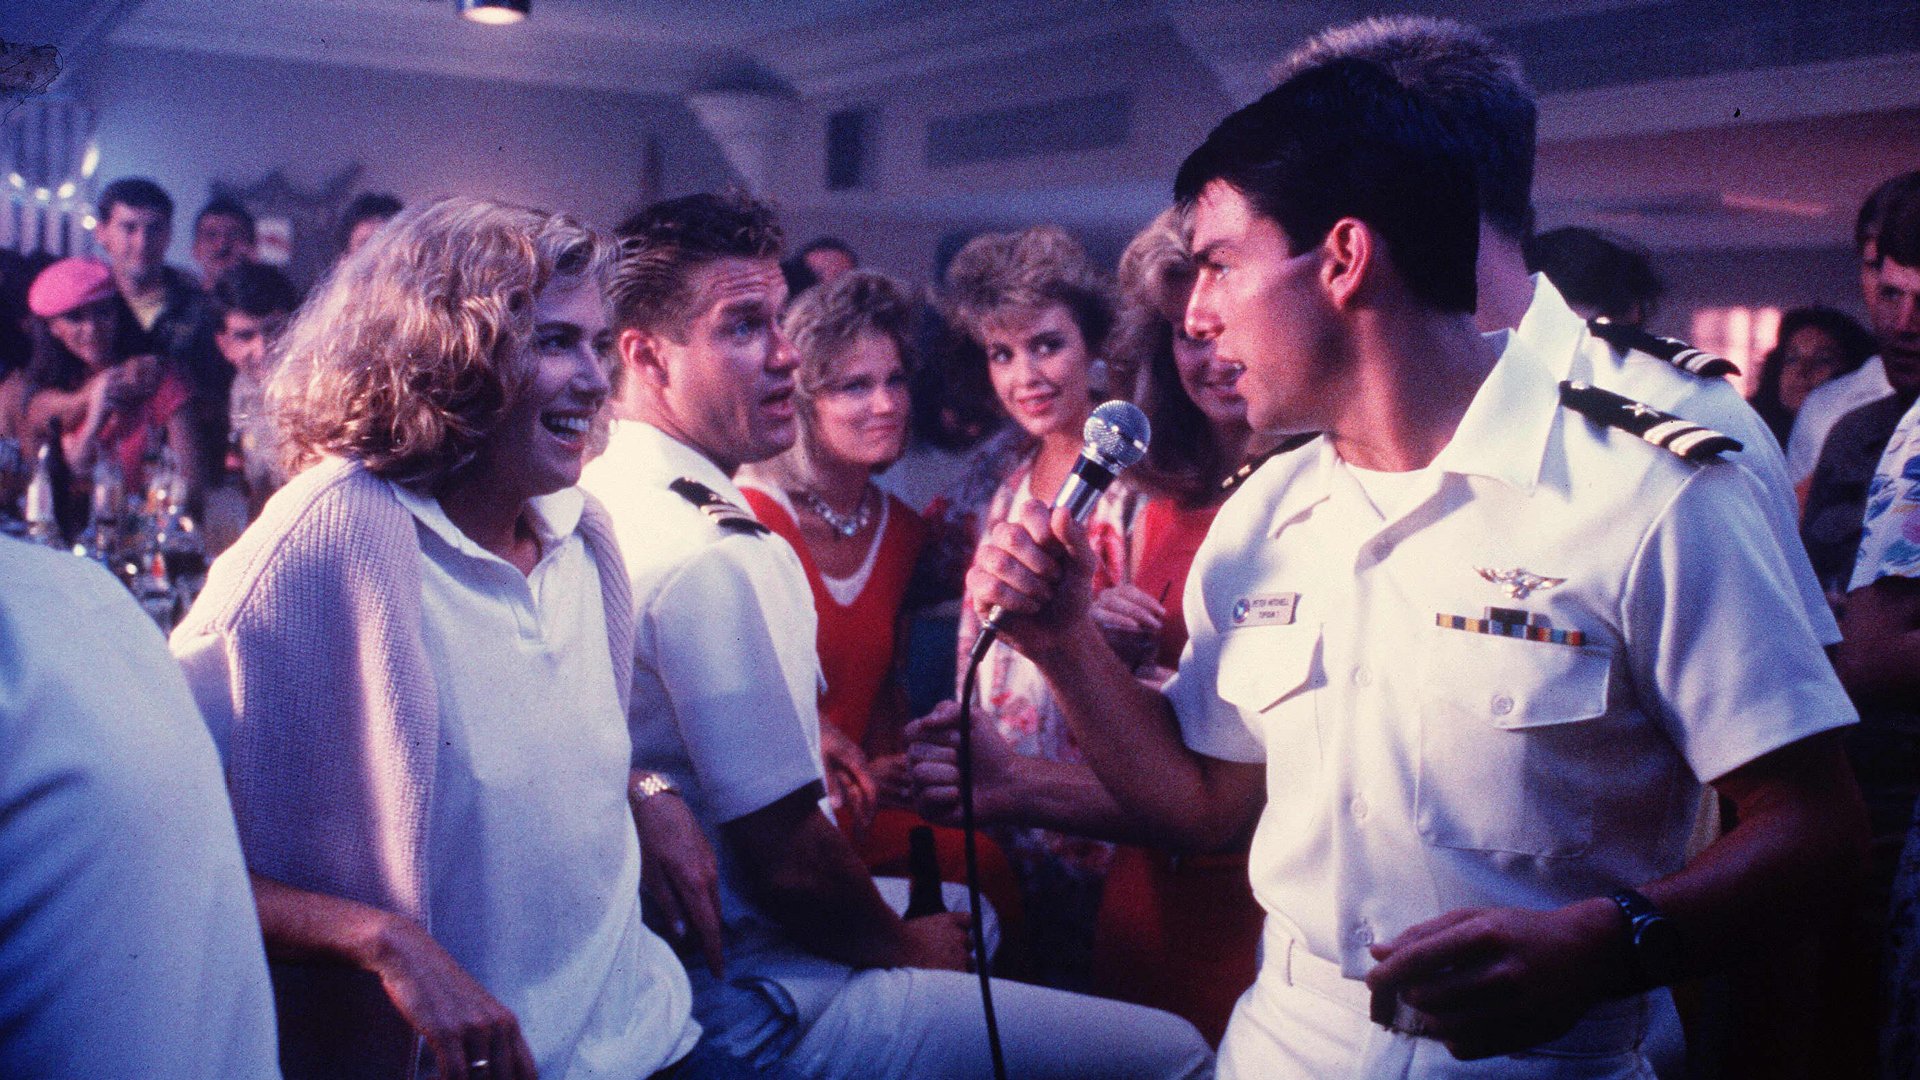 A man in navy uniform sings to a woman in a bar, surrounded by people.